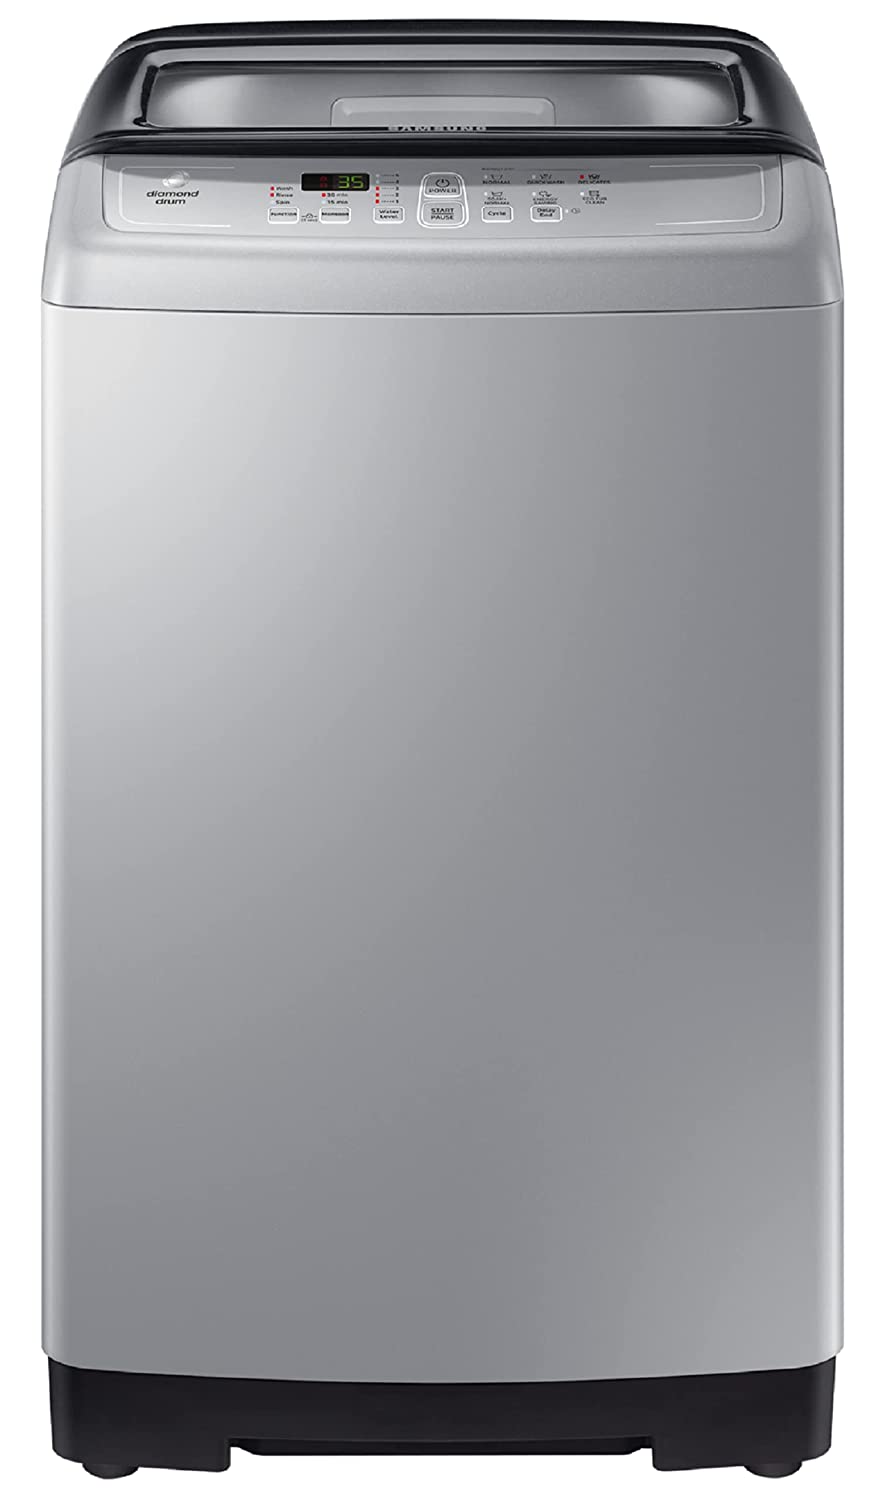  Buy Samsung 6.5 kg Fully-Automatic Top Loading Washing Machine